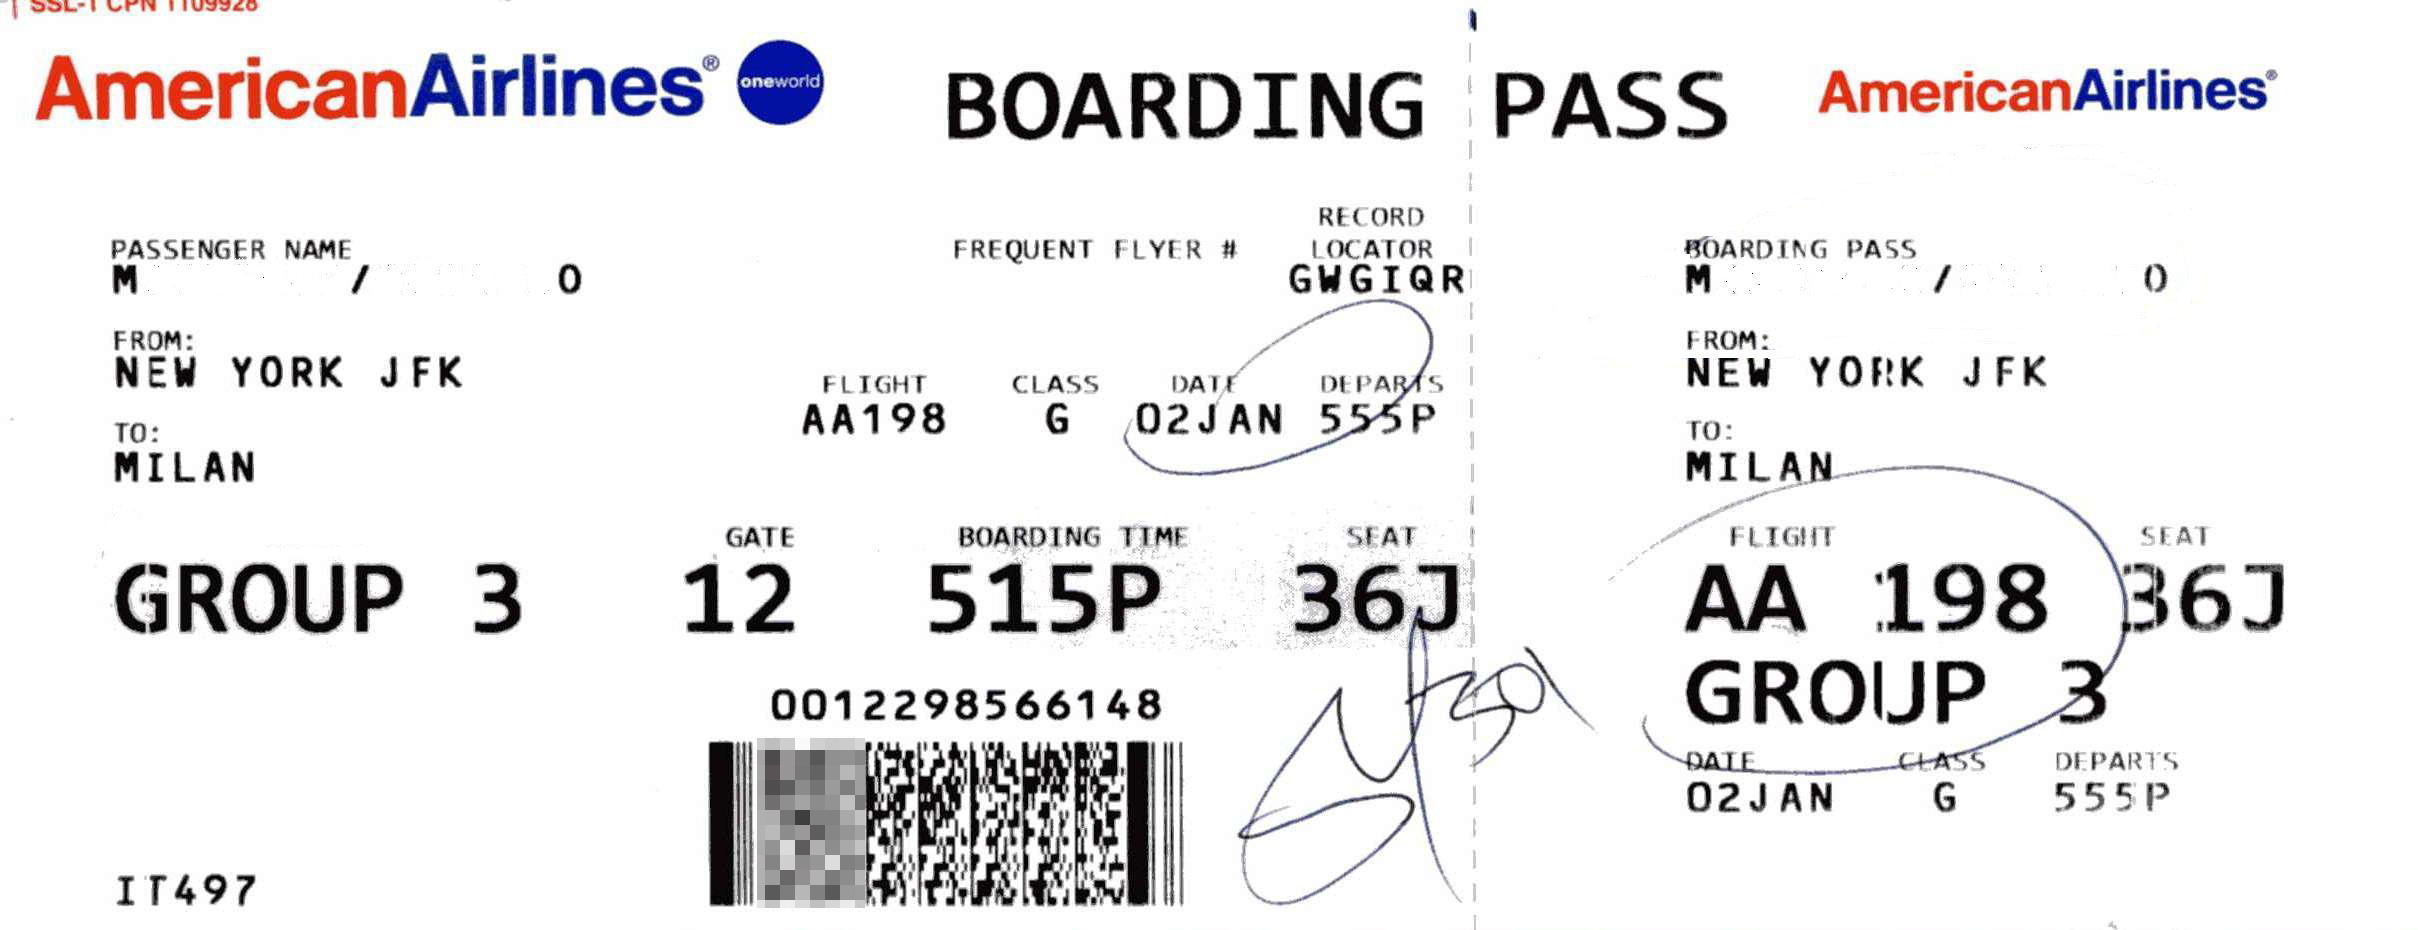 Why You Shouldn’t Post Your Boarding Pass on Social Media